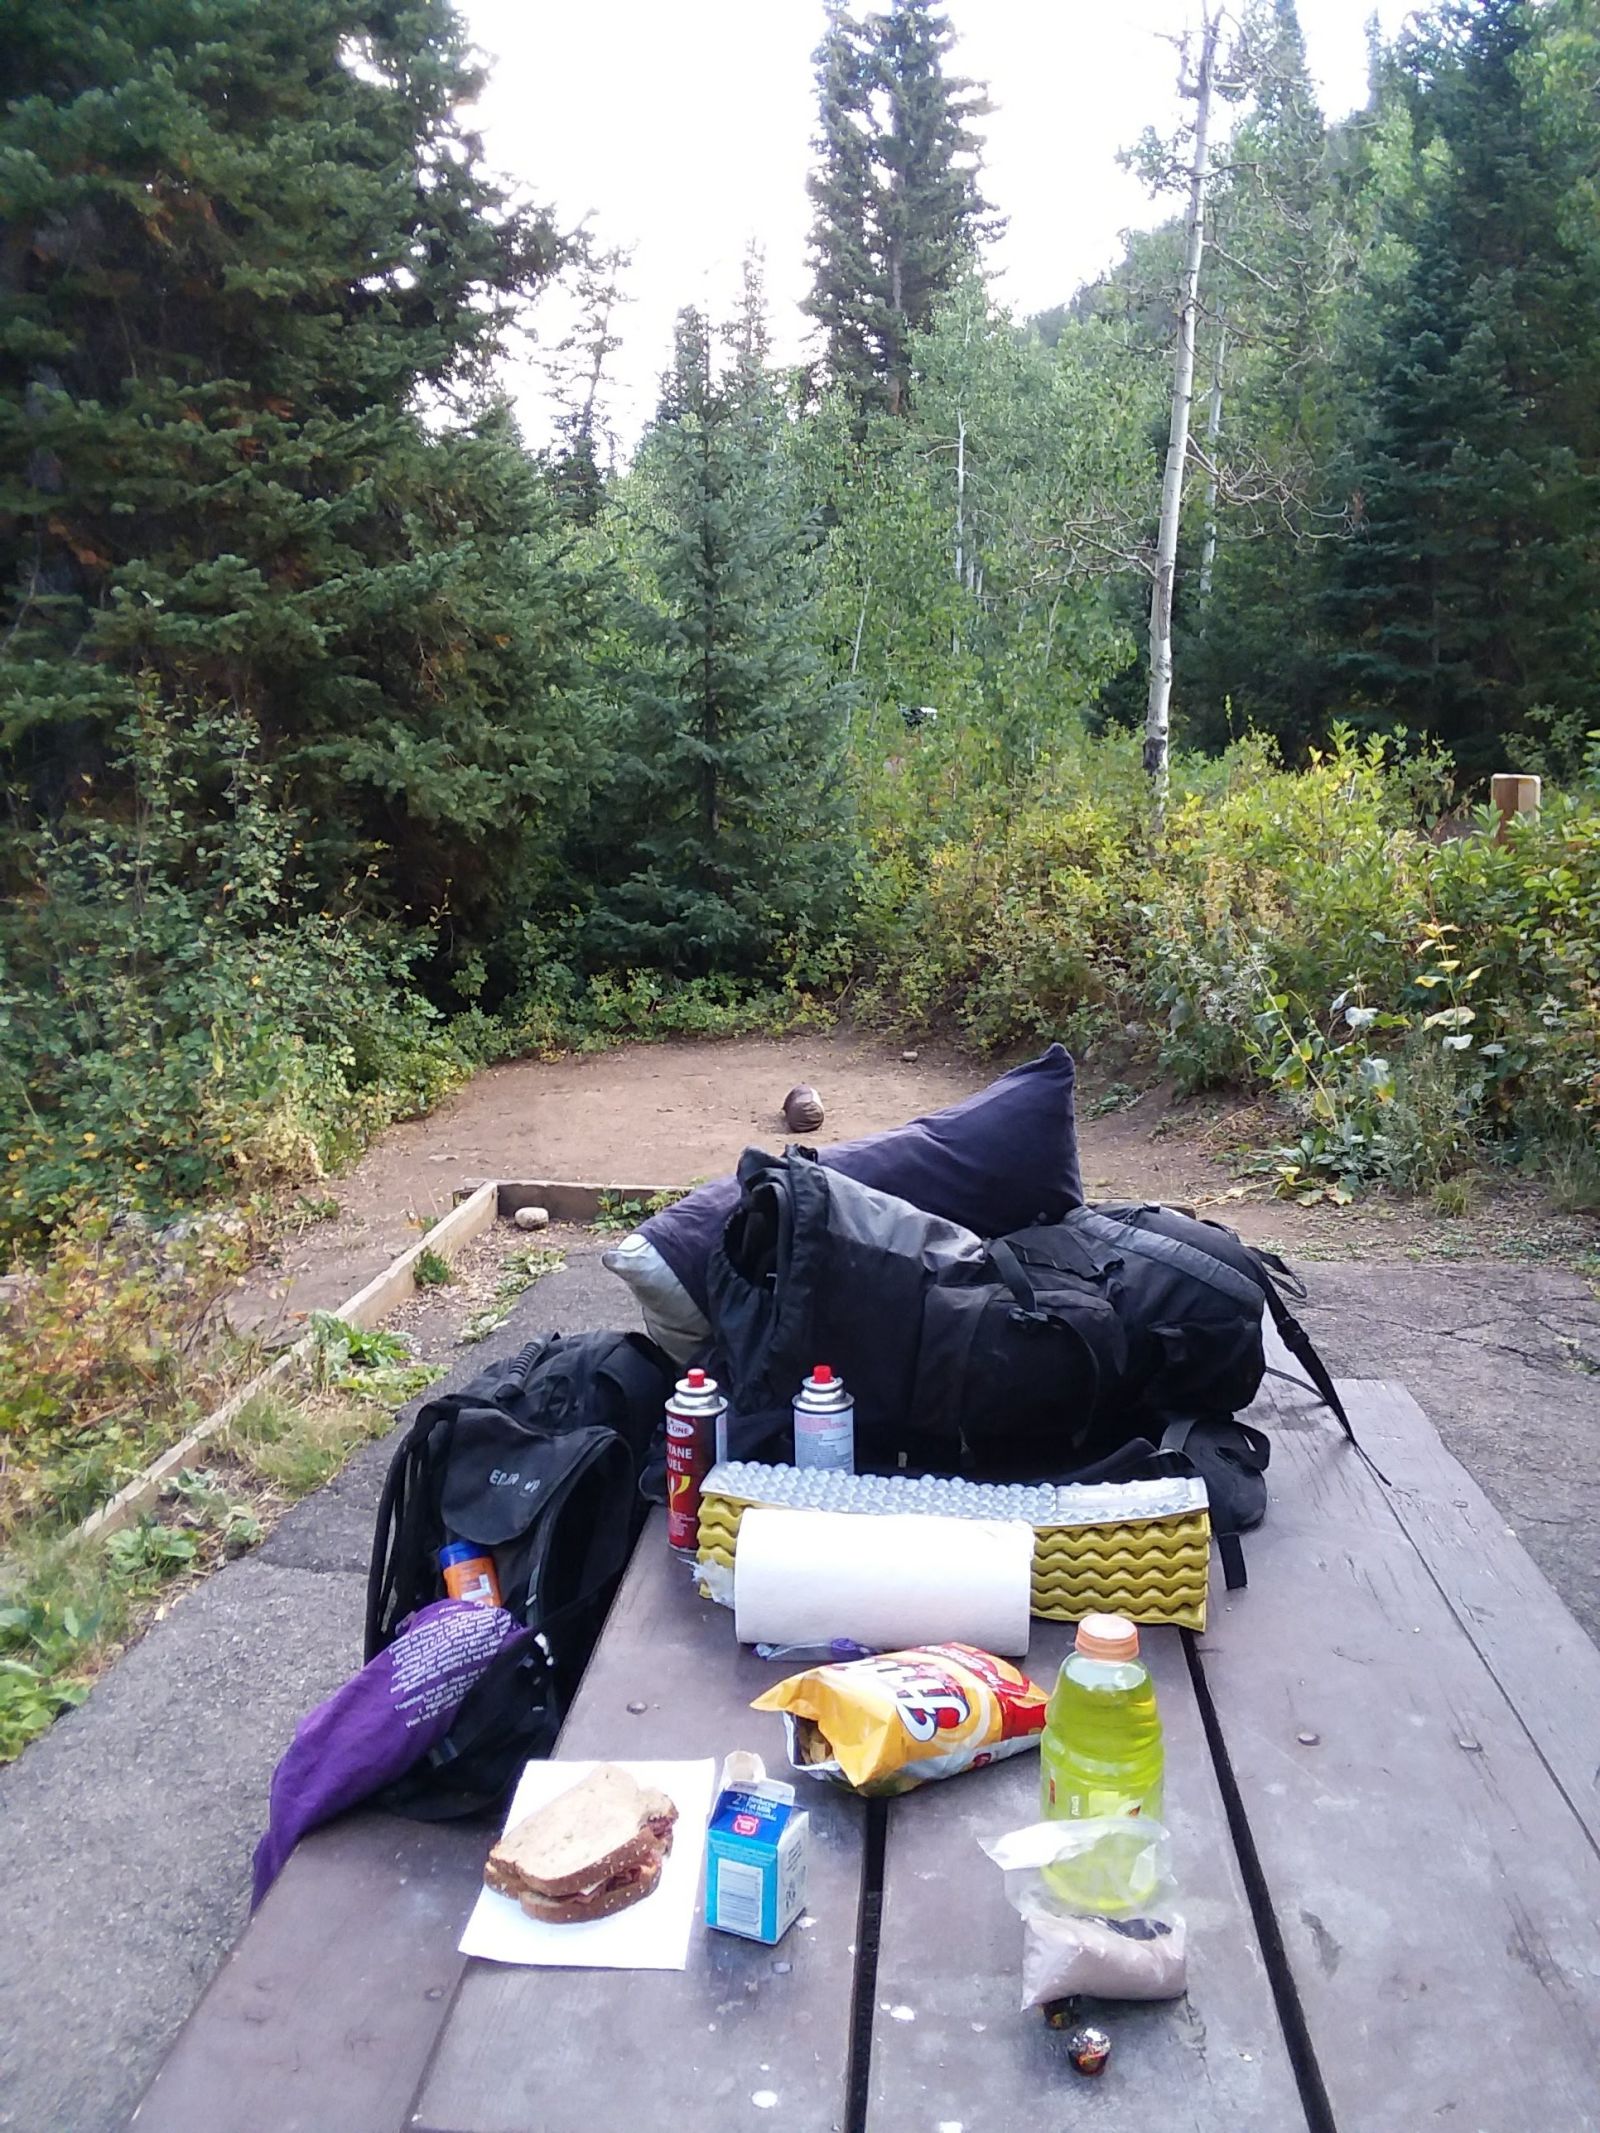 First order of business at my campsite was LUNCH. I had a pastrami and pepper jack cheese sandwich along with a protein shake (homemade in a milk carton and some whey chocolate powder. Also some much needed gatorade and a side of fritos. 